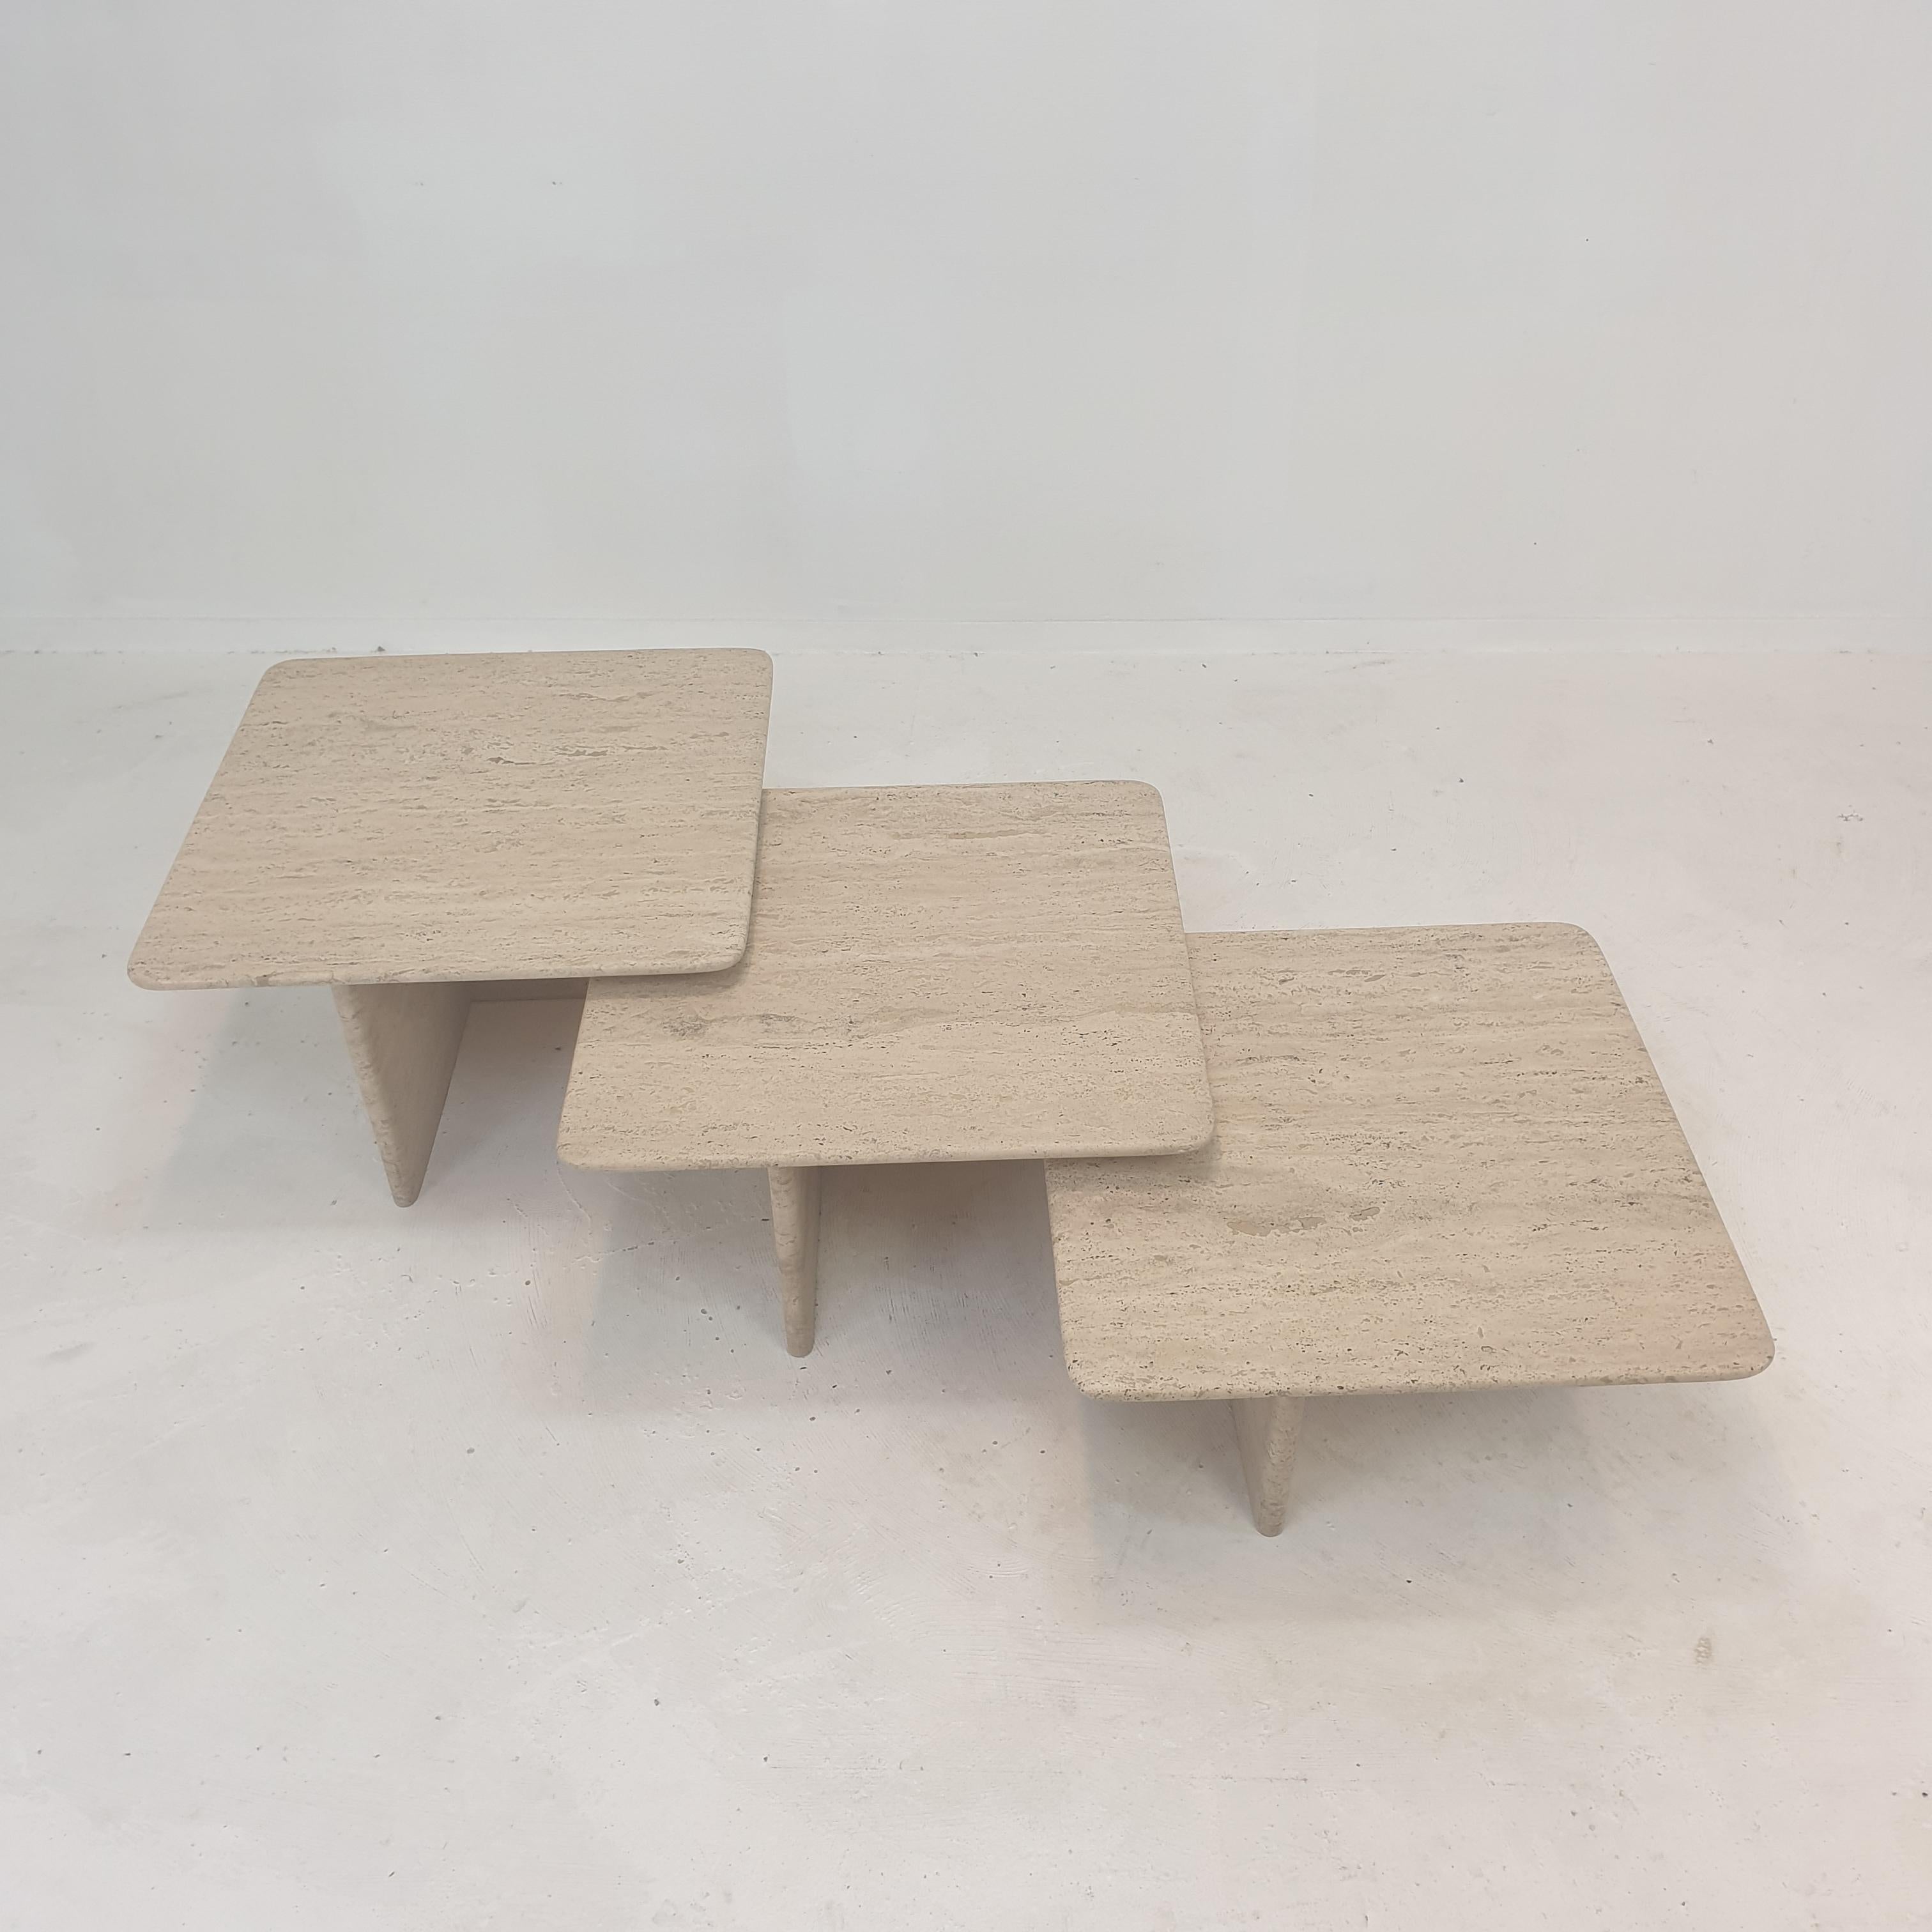 Set of 3 Italian Travertine Nesting or Coffee Tables, 1980s For Sale 7